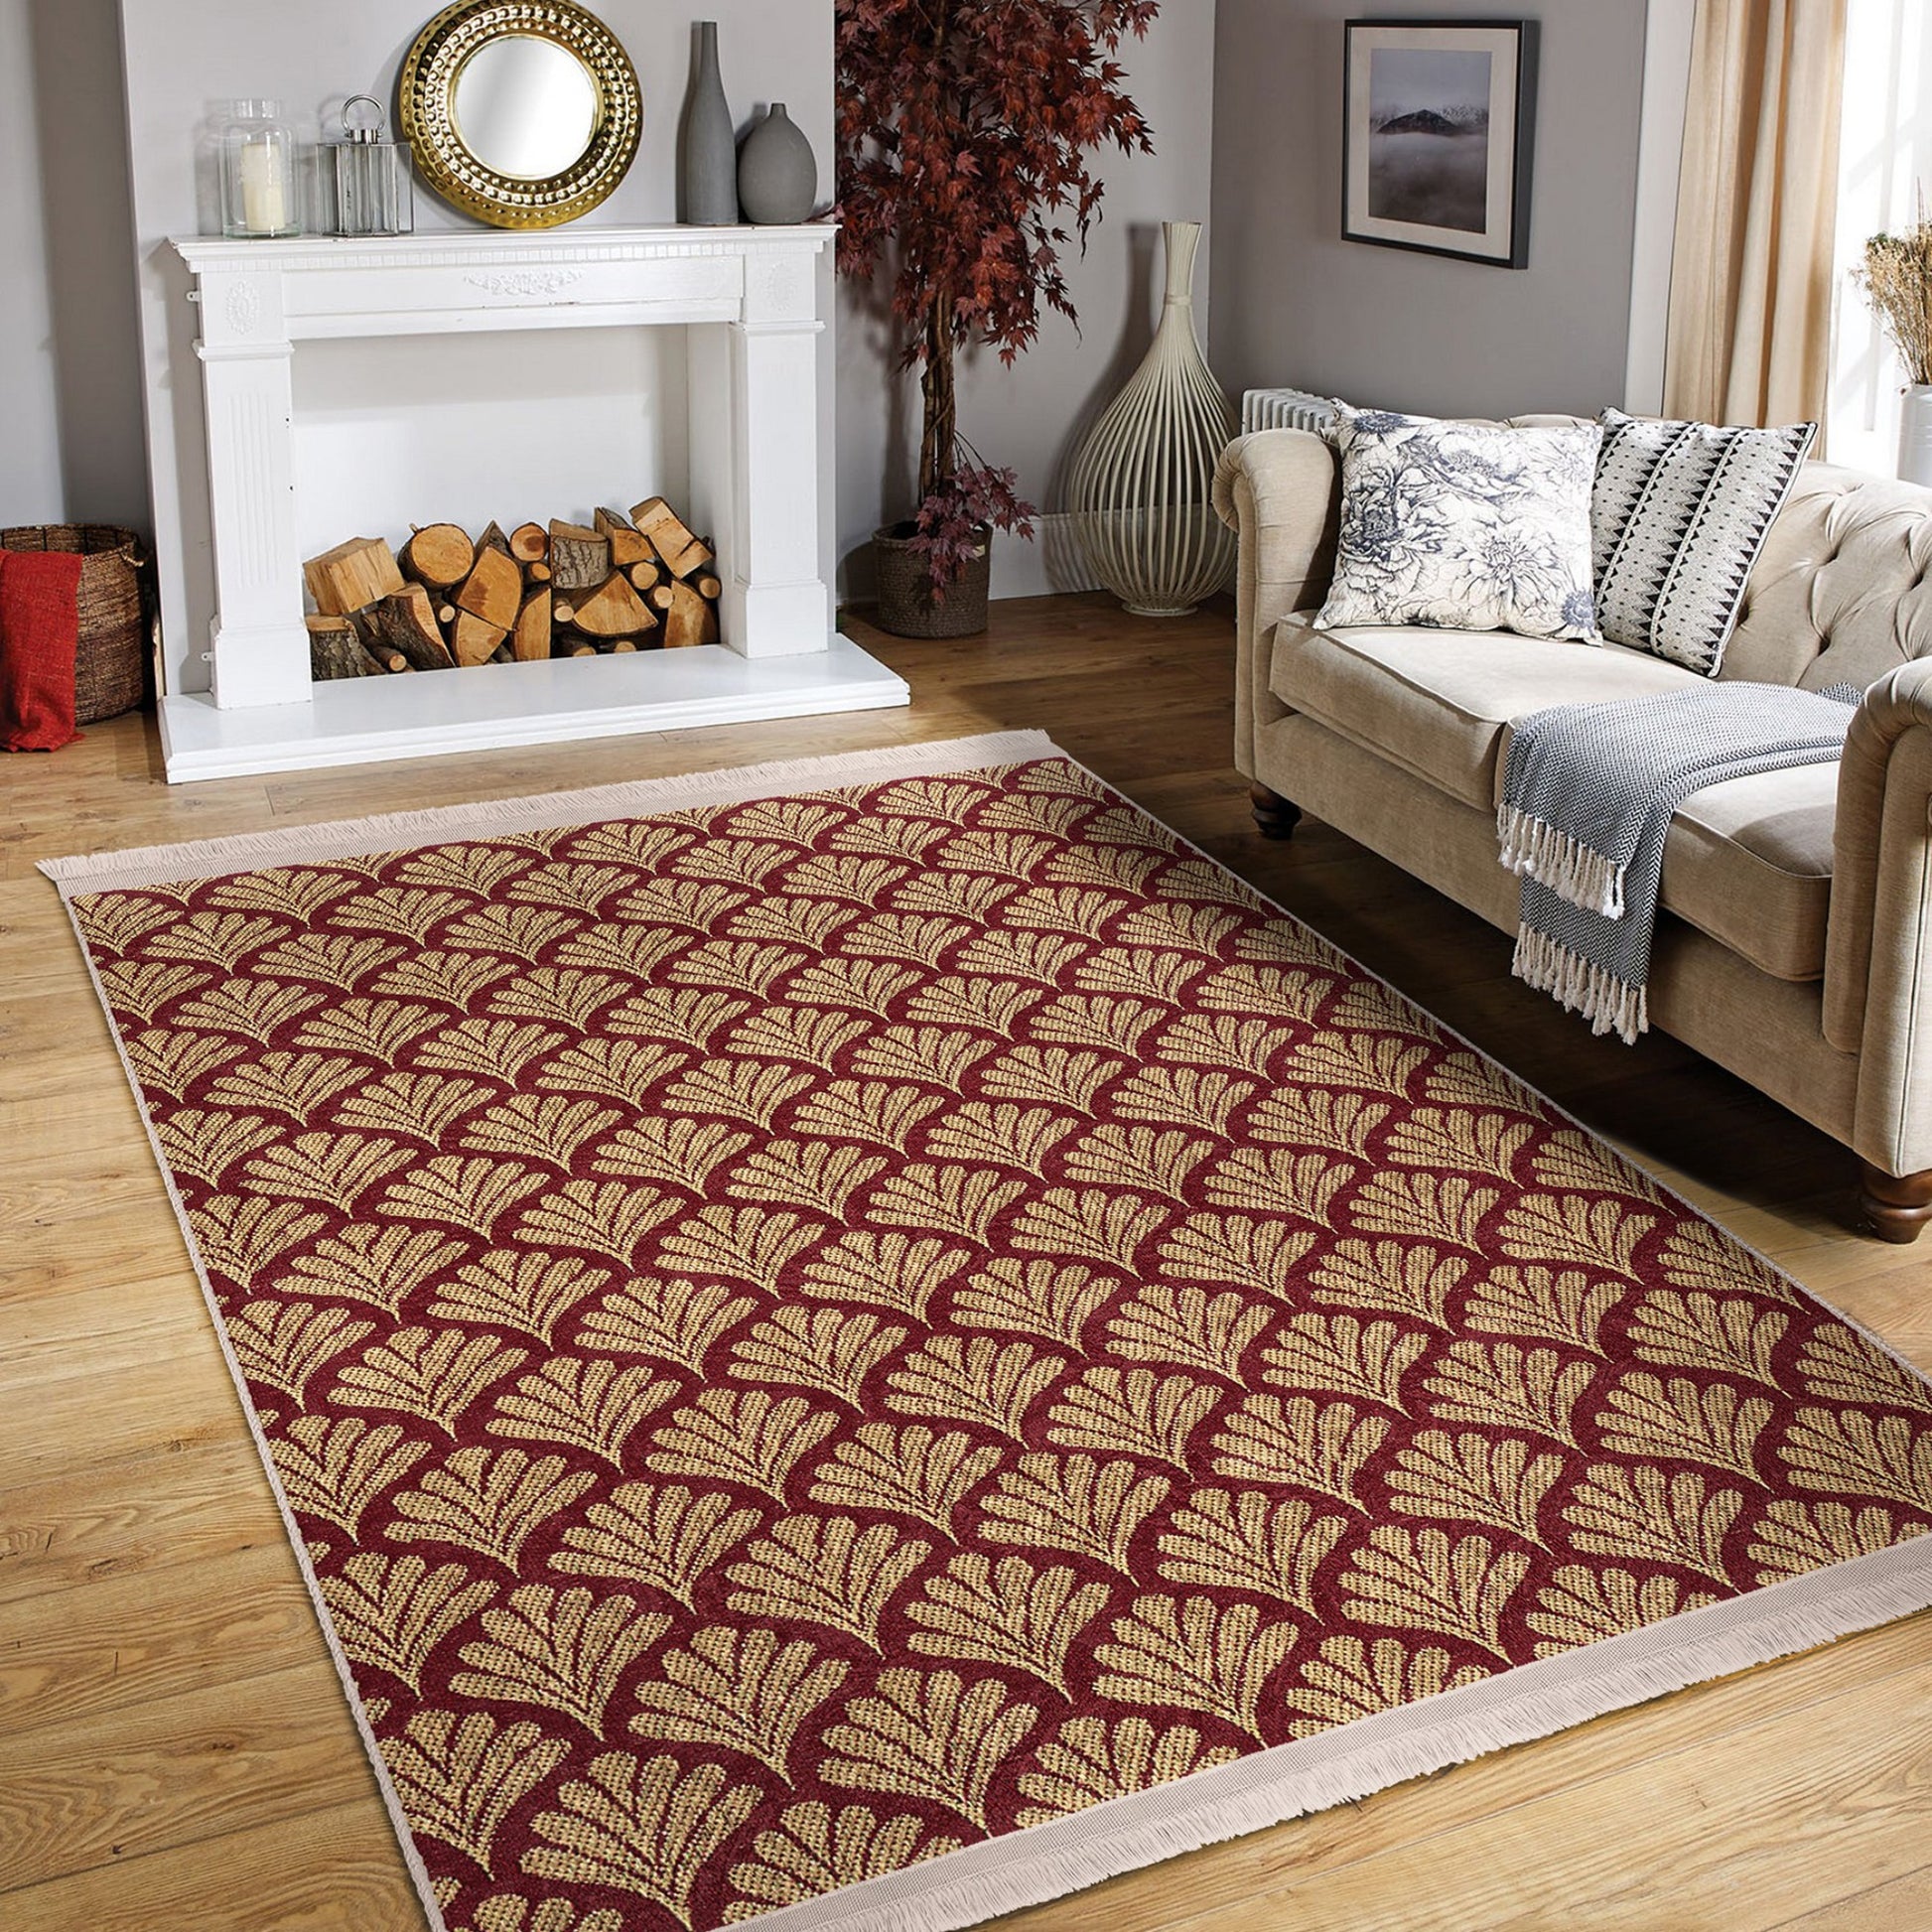 Decorative Rug with Classic Charm and Gold Accents